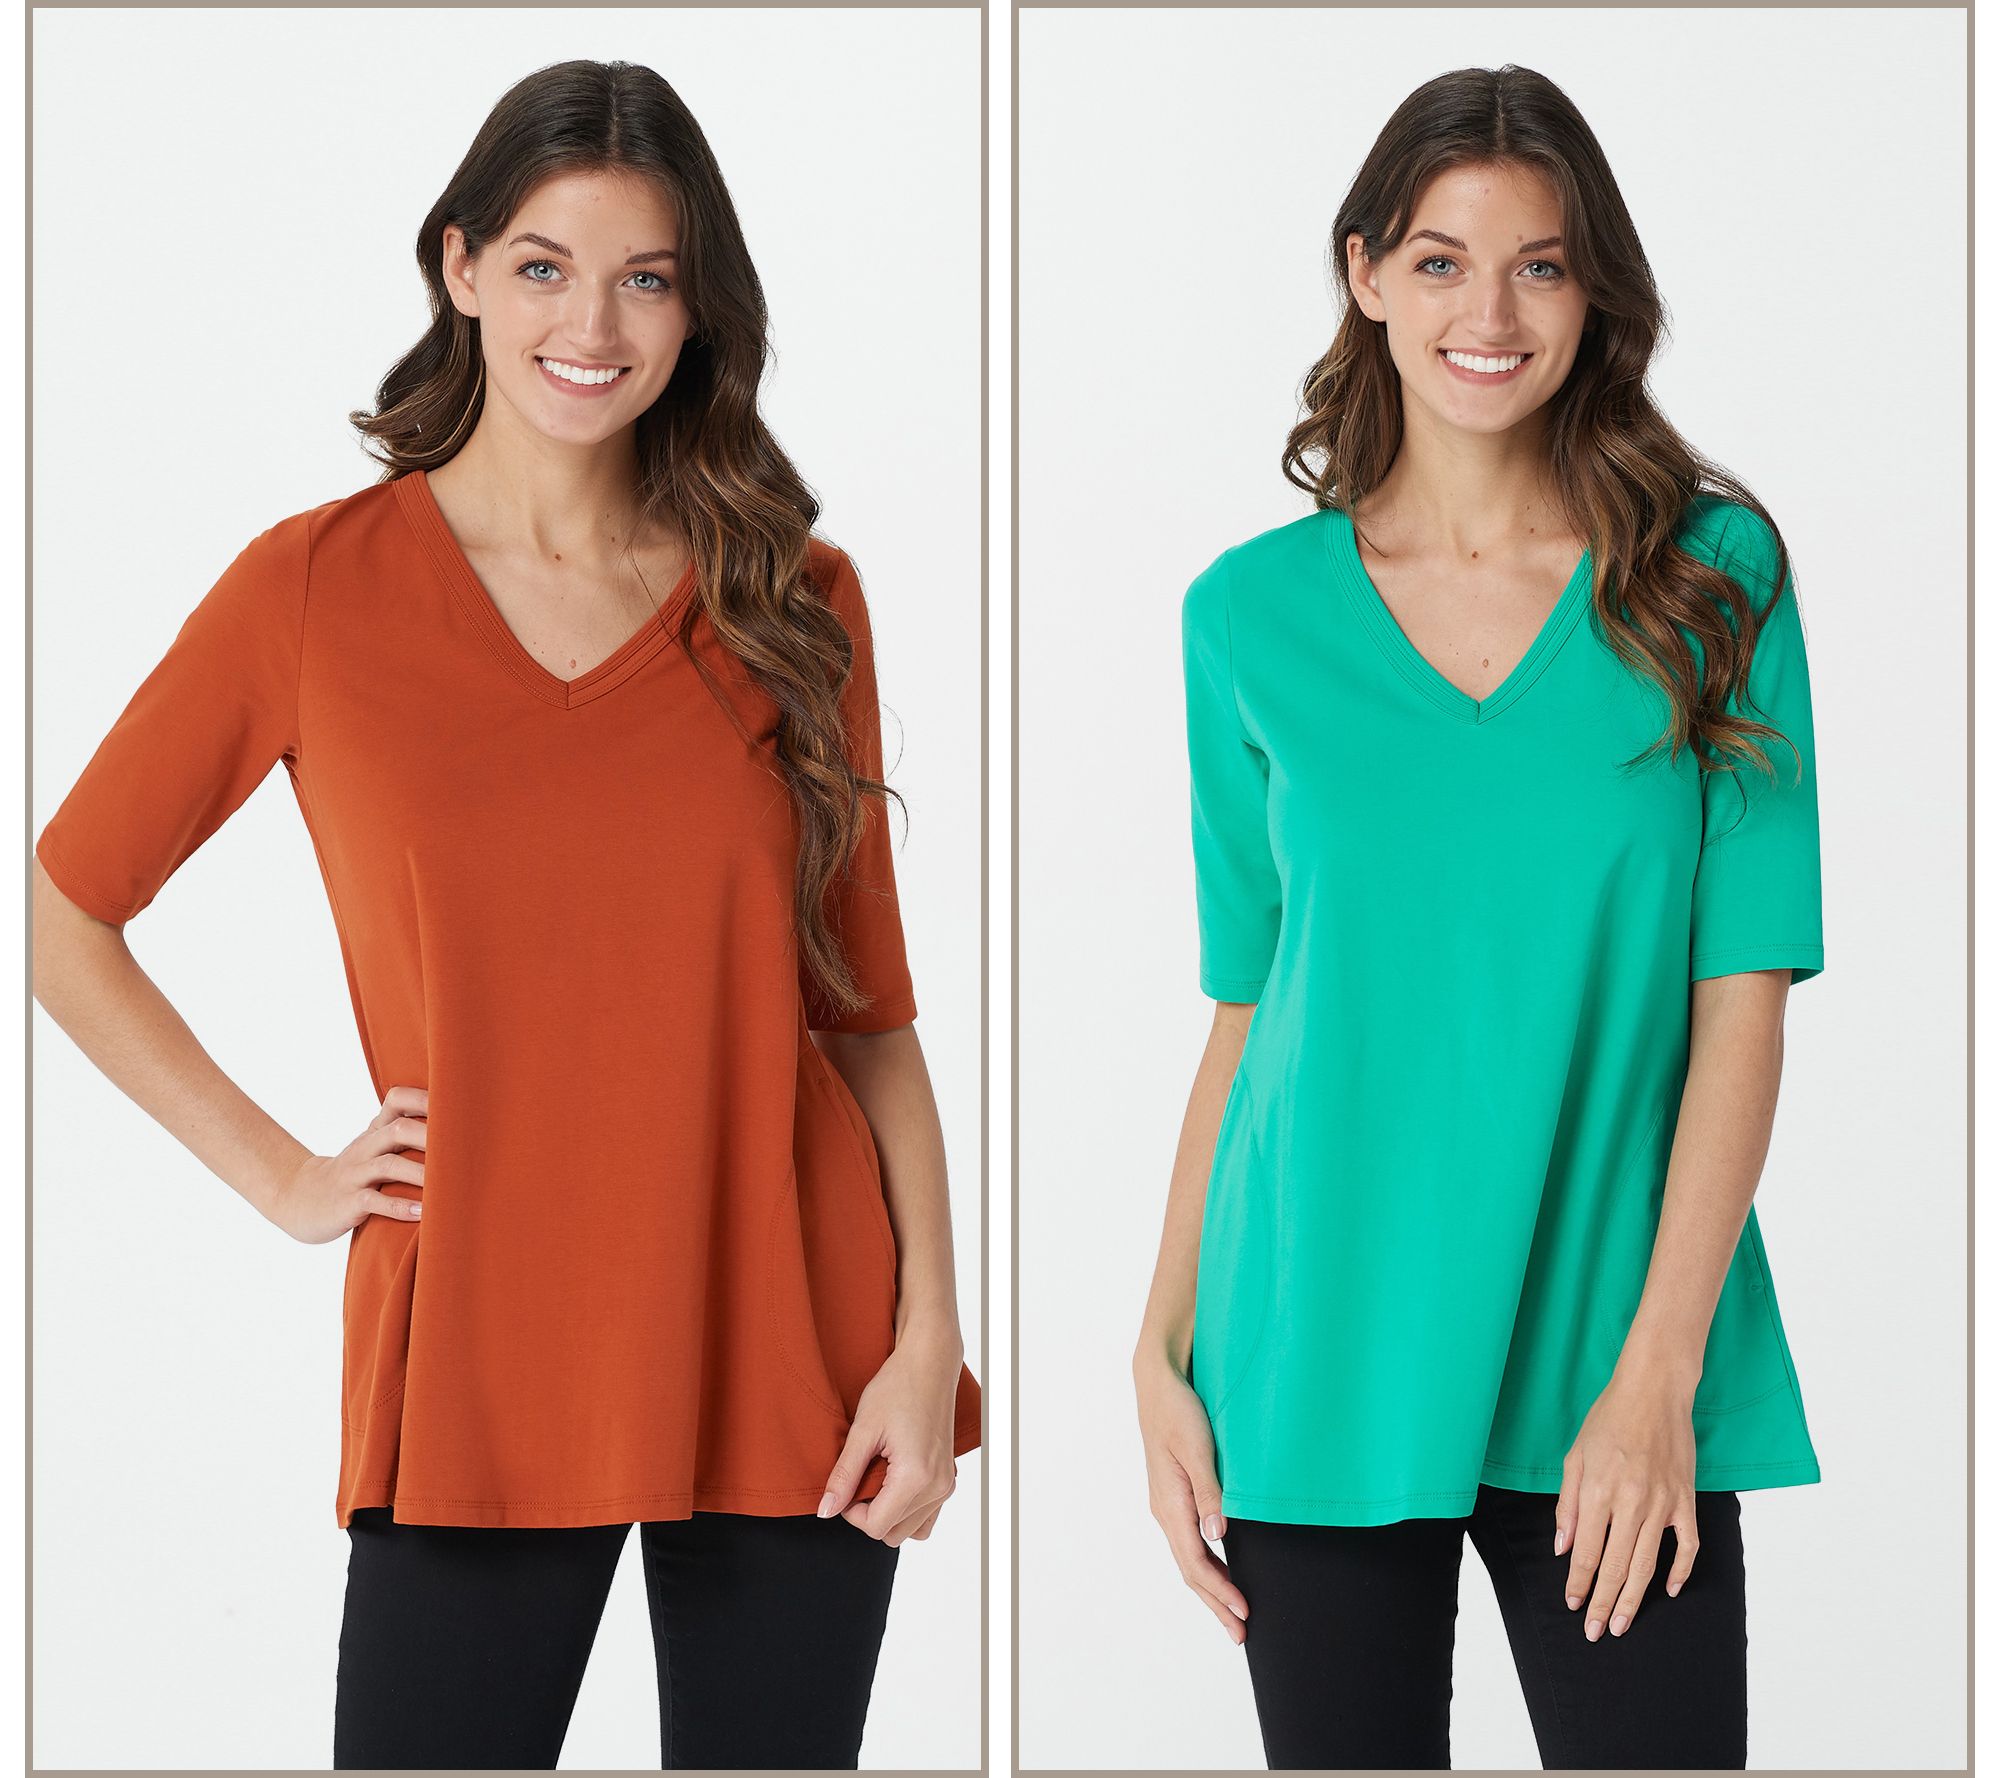 Women with Control Washed Cotton Jersey Set of 2 V-Neck Tops - QVC.com